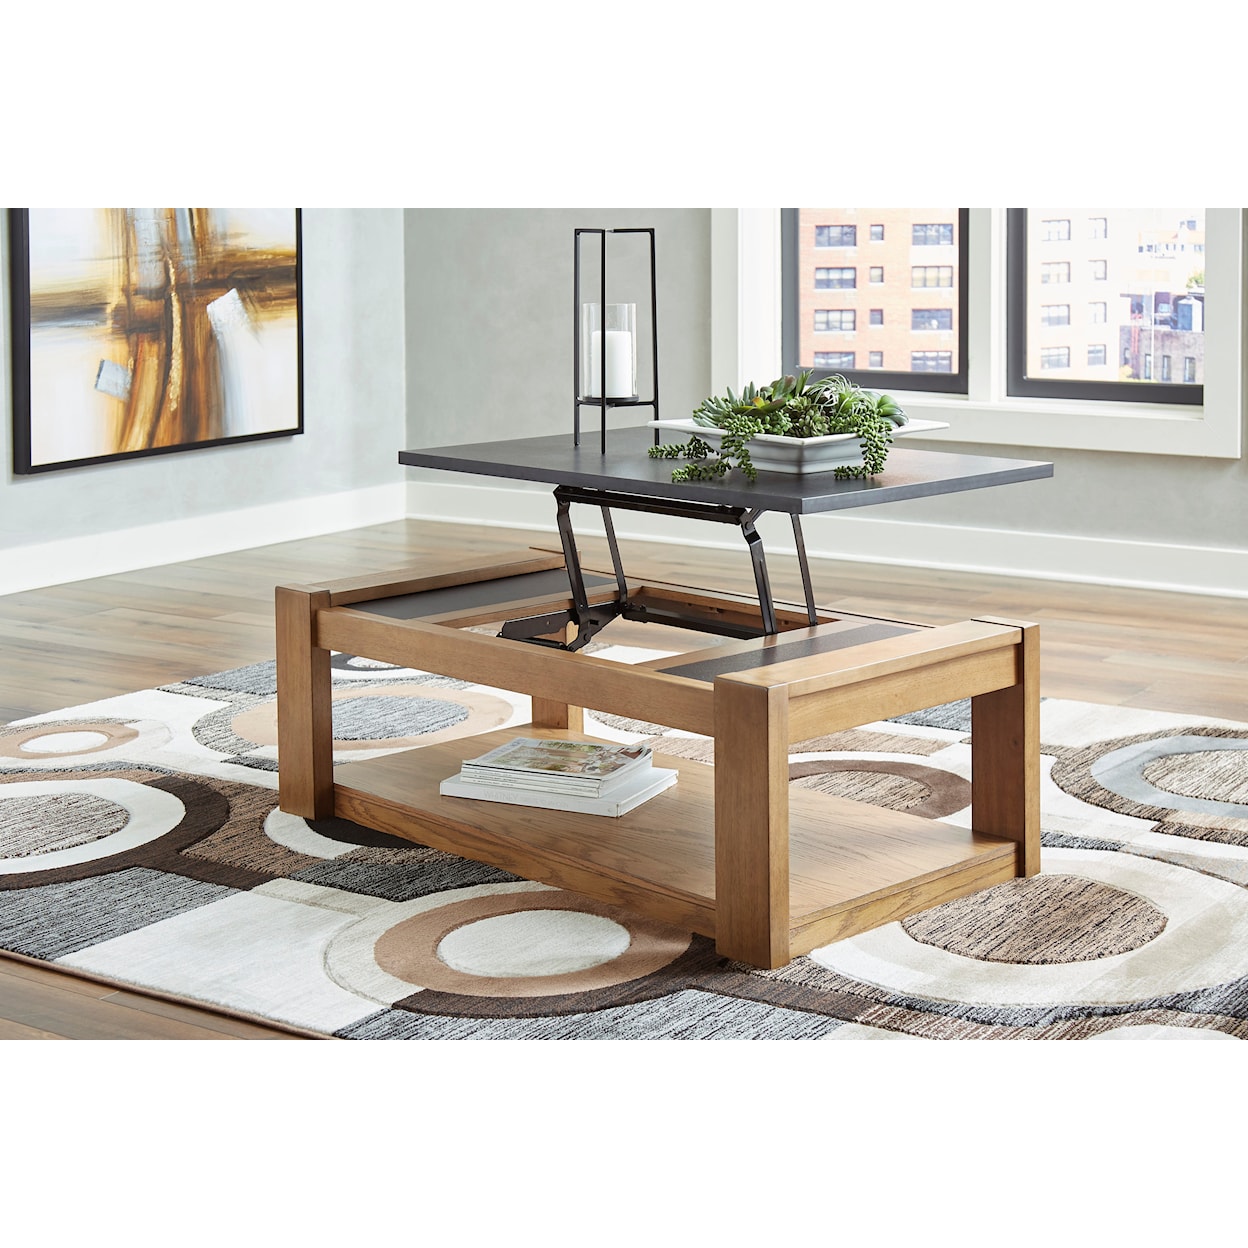 Signature Design by Ashley Quentina Lift Top Coffee Table